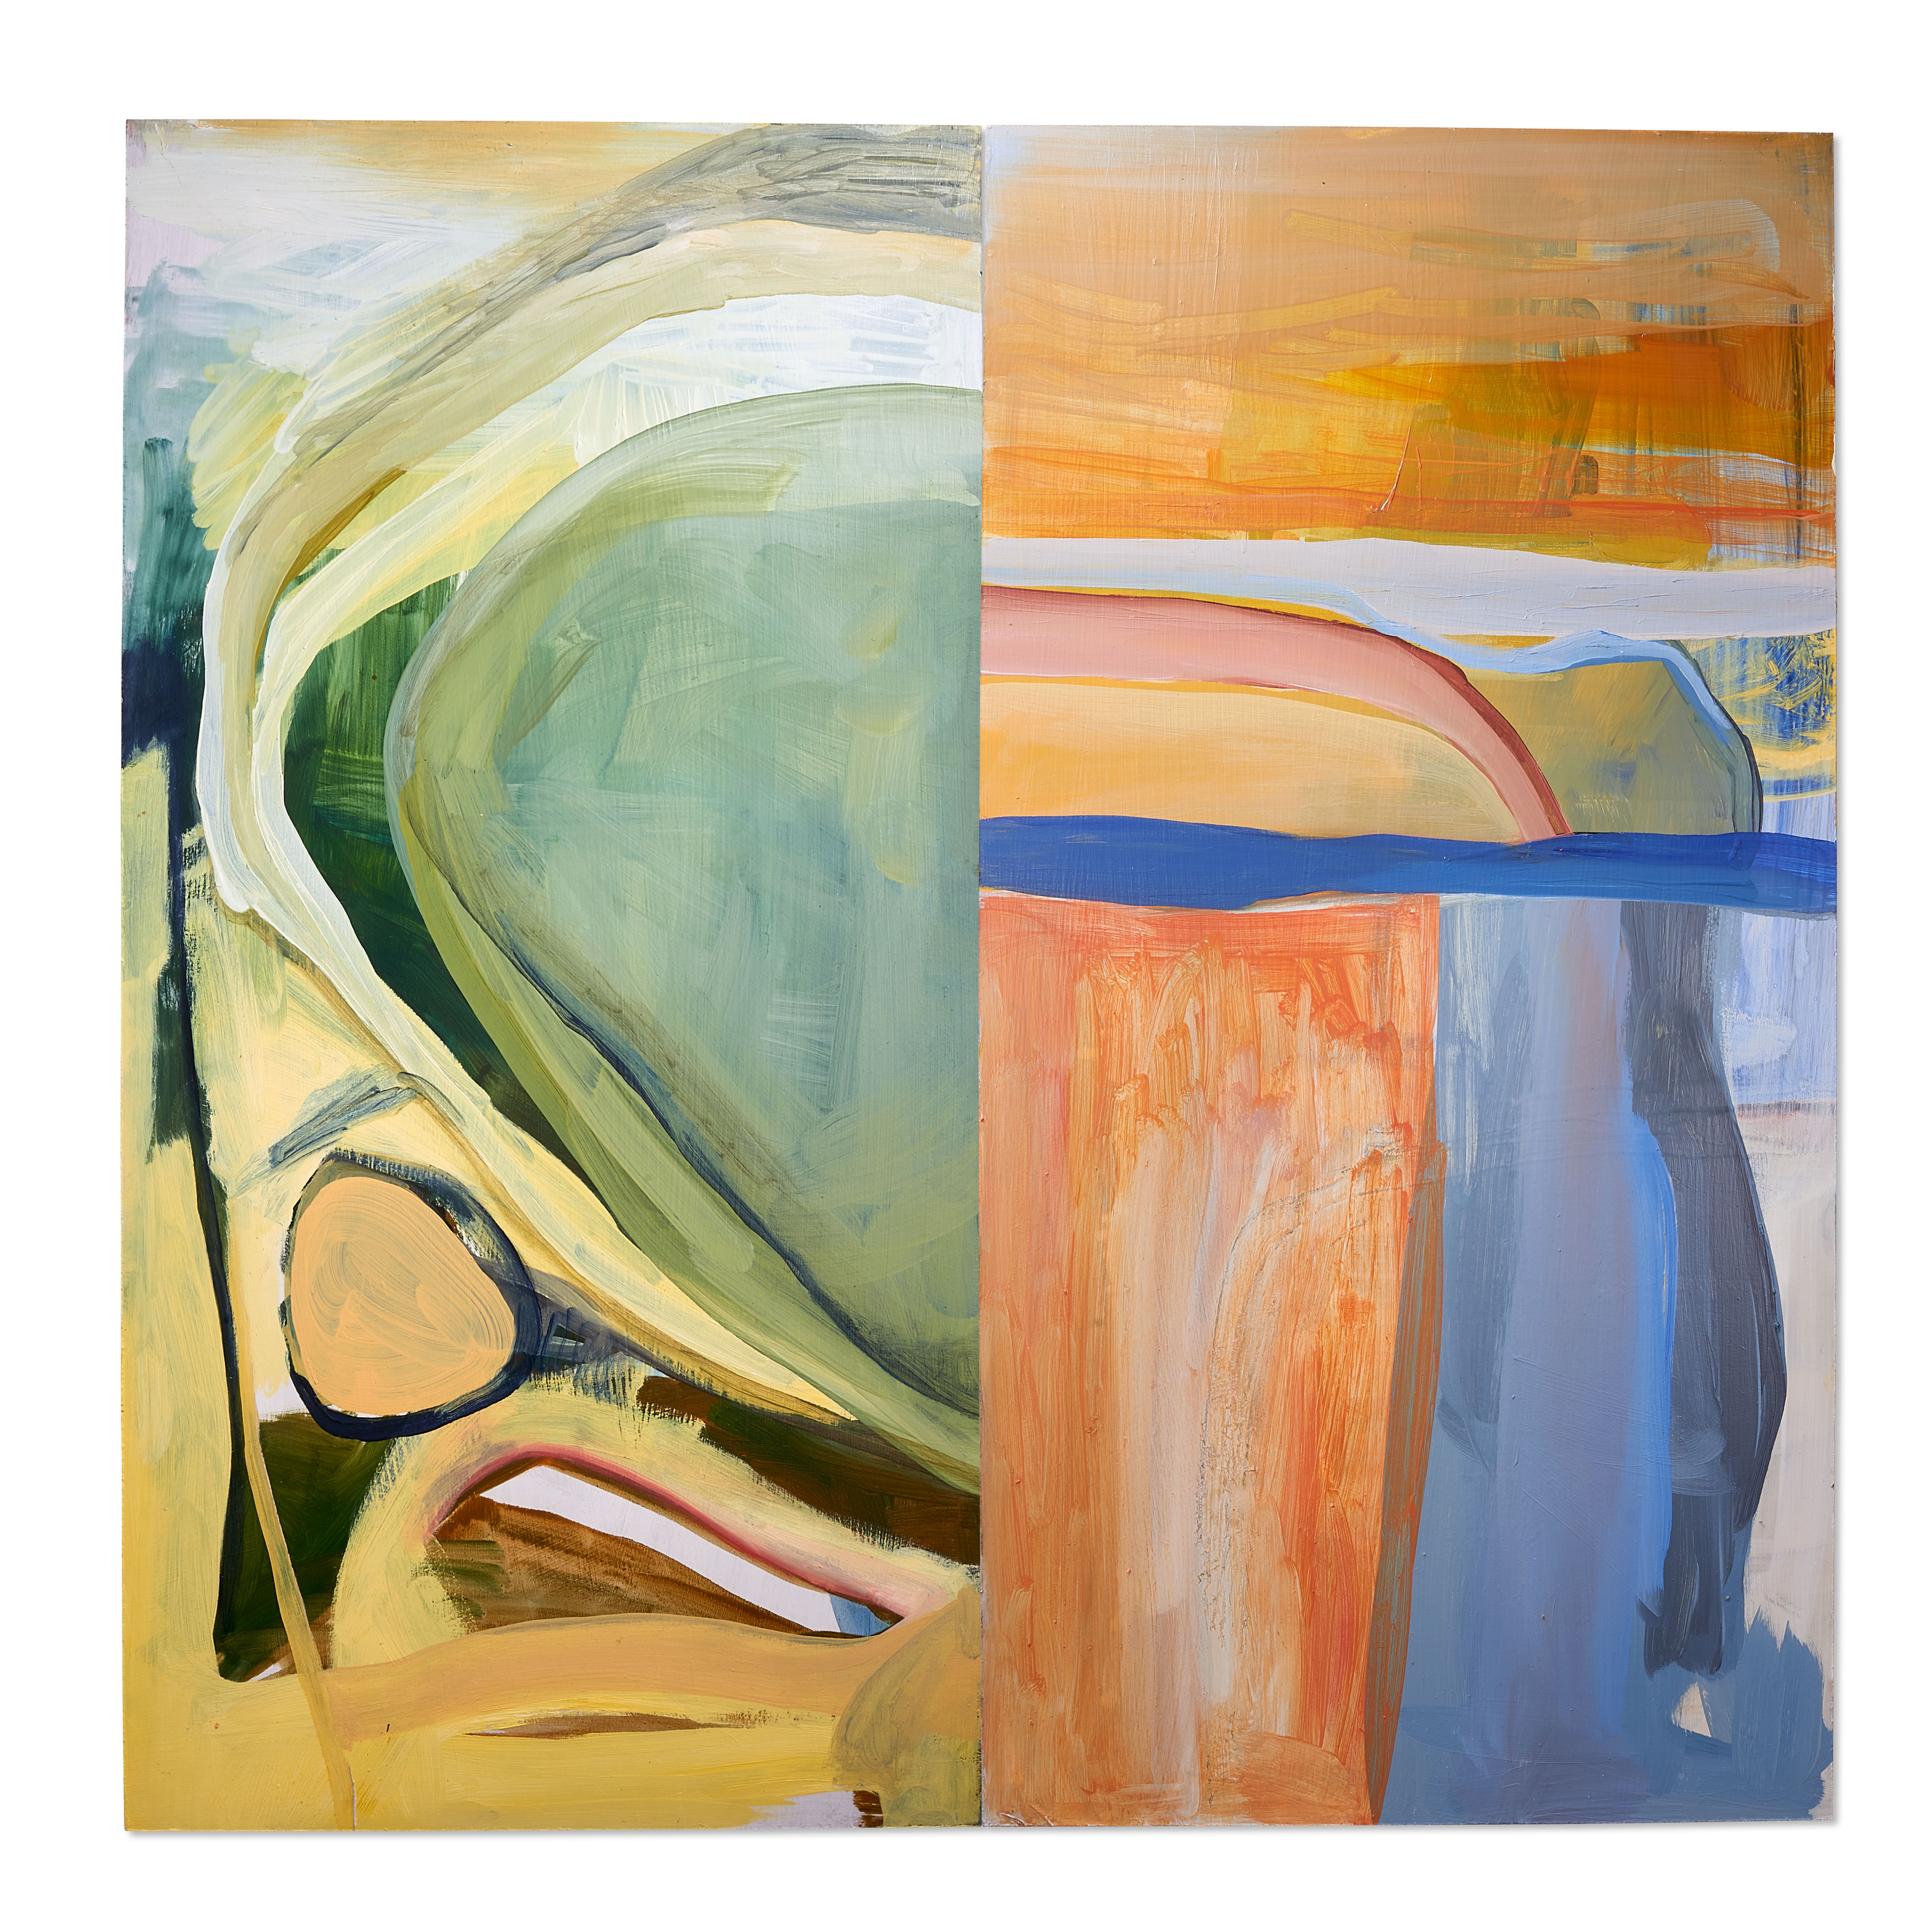 A photograph of a square abstract painting by the artist Caroline Coolidge with bright colors. The painting is divided vertically down the center so that the left side is covered in yellows and greens and the right side has hues of oranges and blues.